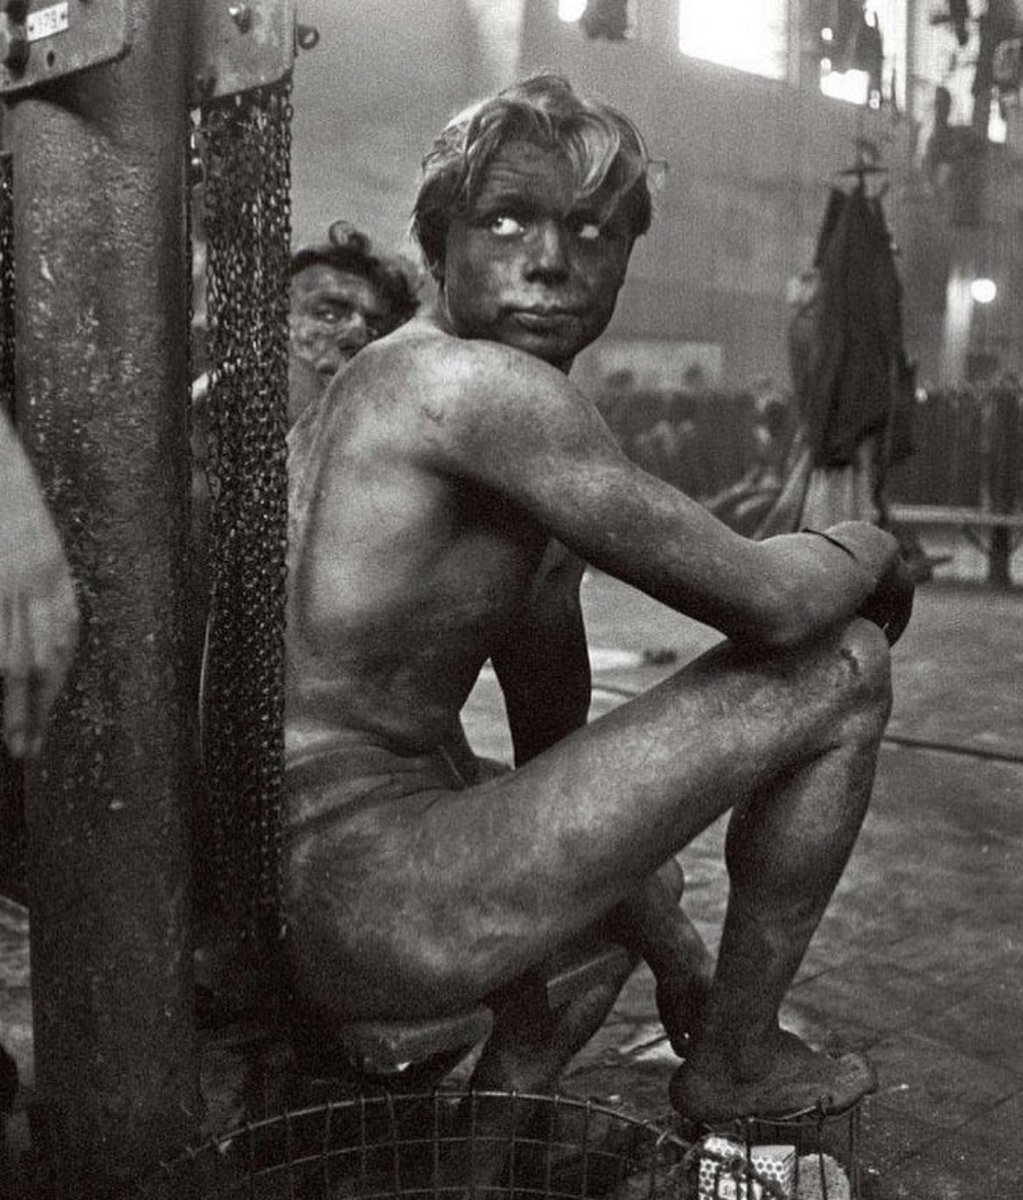 Coal miner waiting to get in the communal shower at the end of a shift in Gelsenkirchen, Germany in 1958.